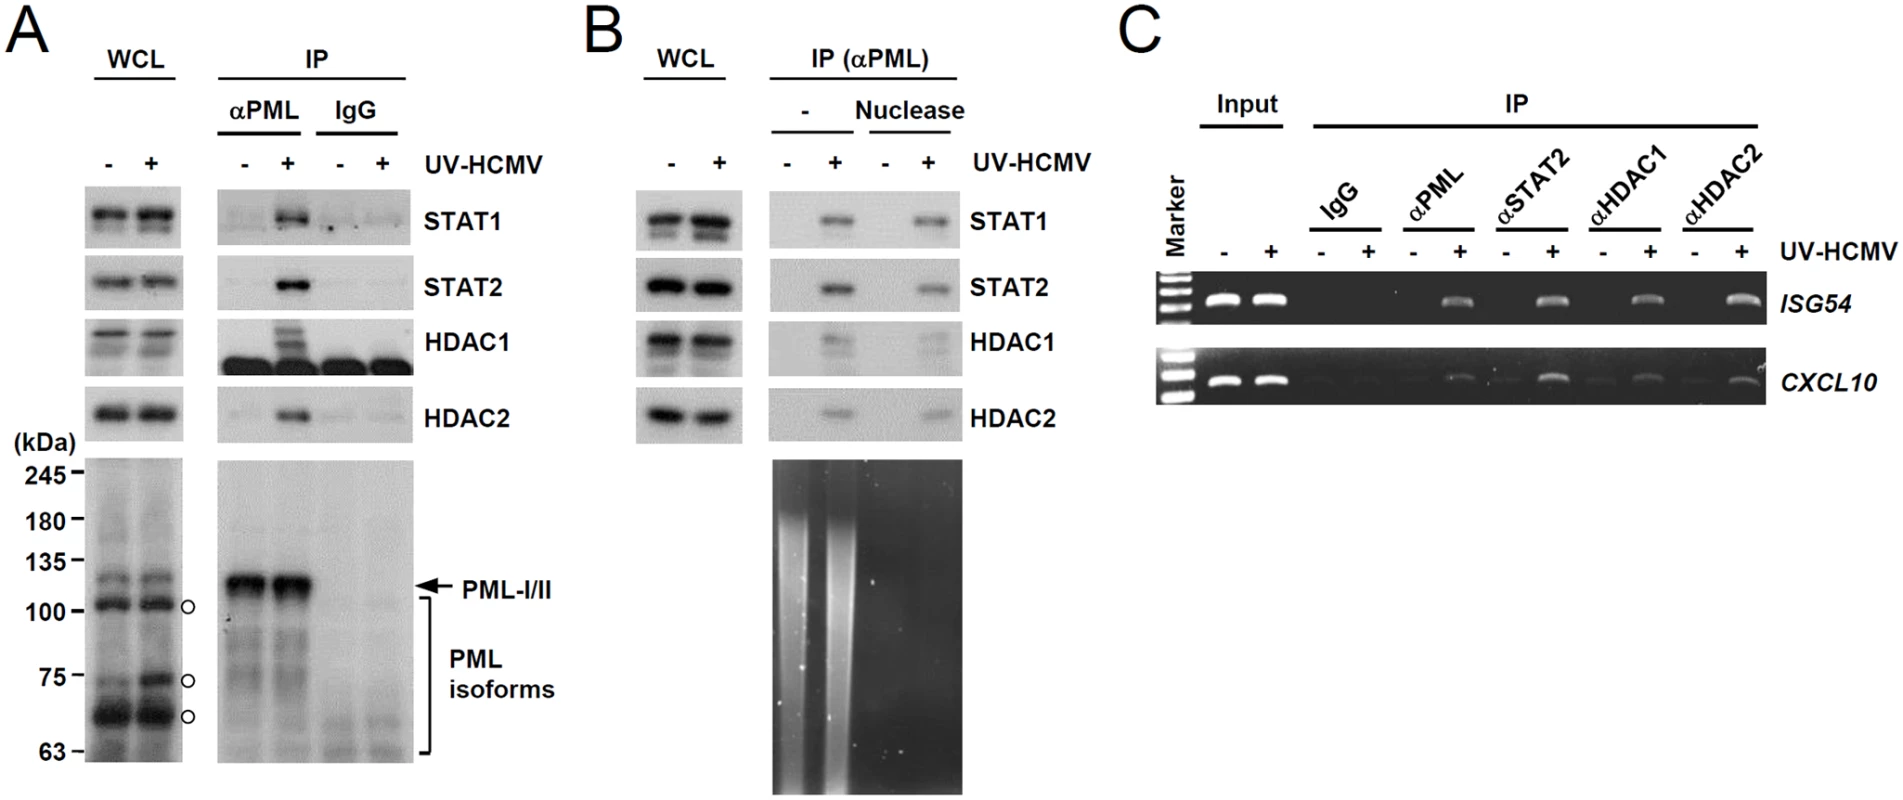 Association of PML with STAT1, STAT2, and HDAC1 on ISG54 and CXCL10 promoters after UV-HCMV infection.